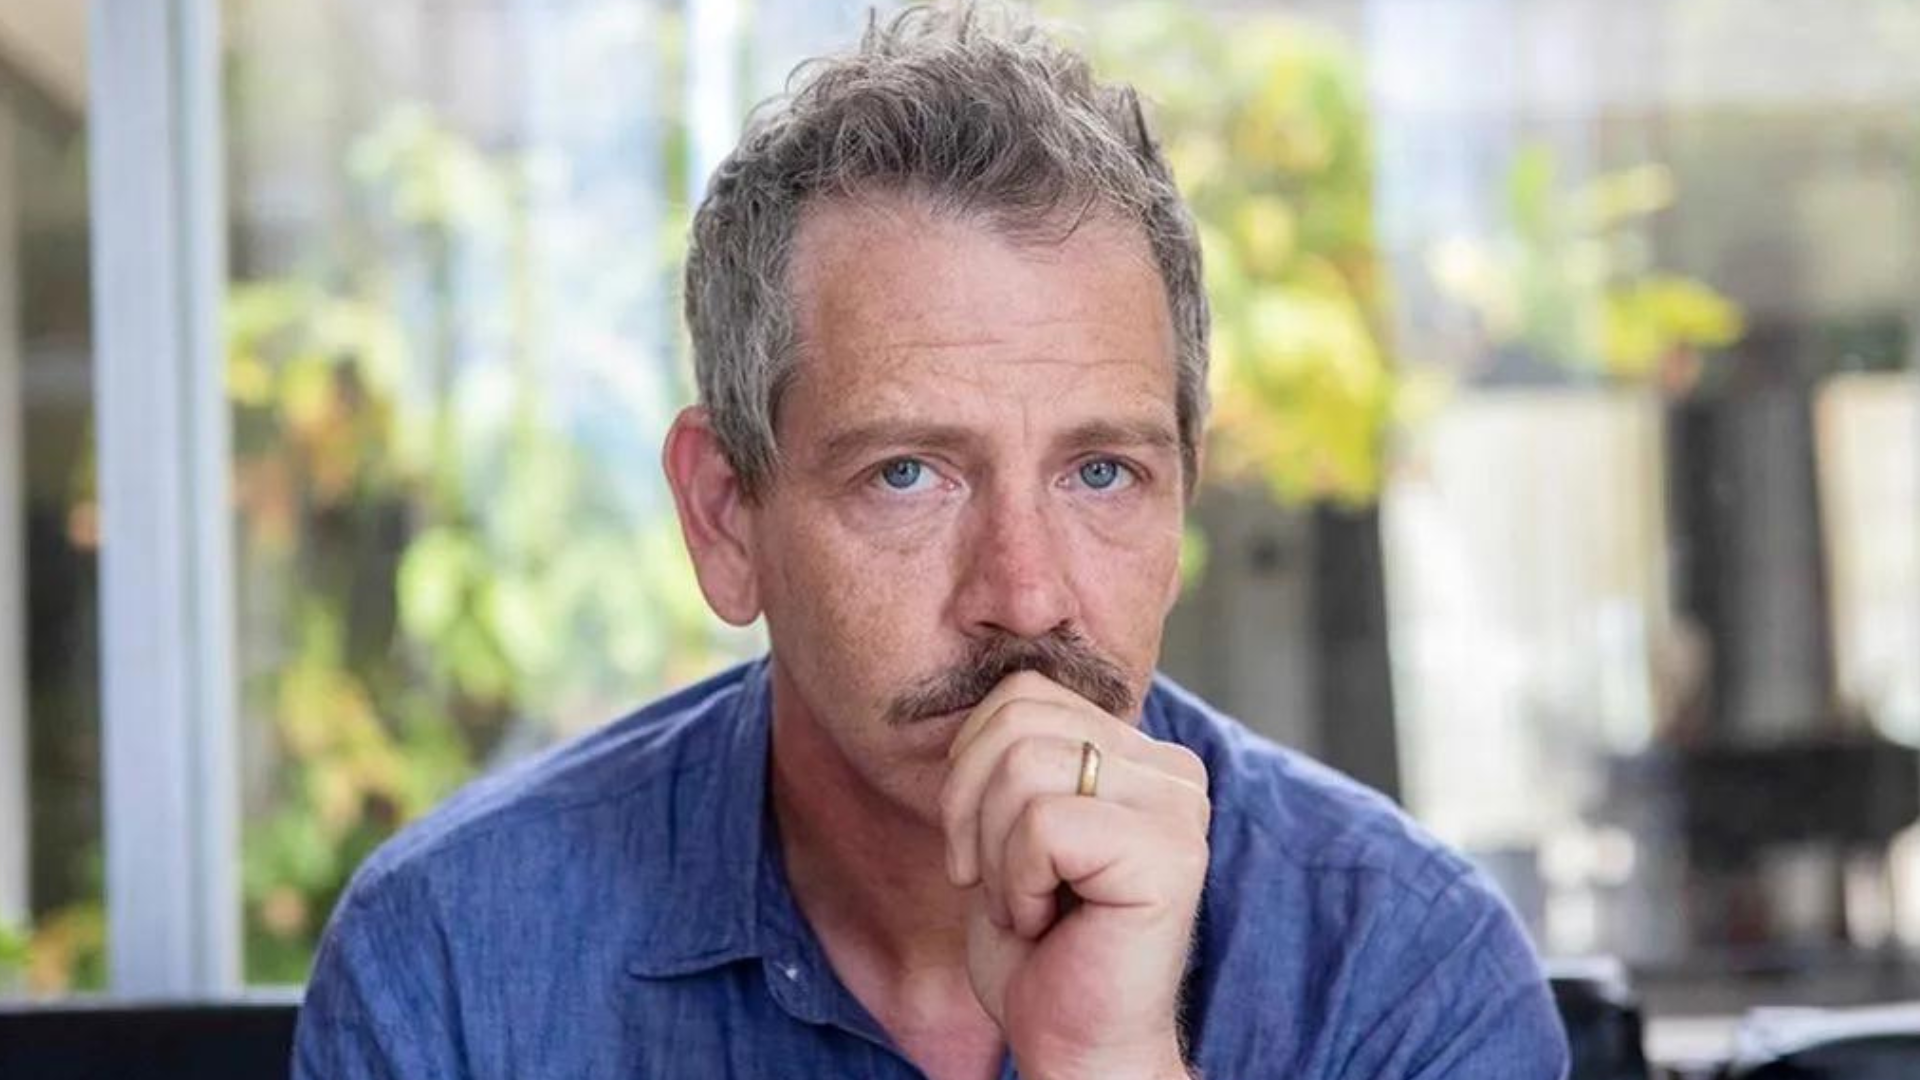 Ben Mendelsohn with a serious face and his hand on his chin